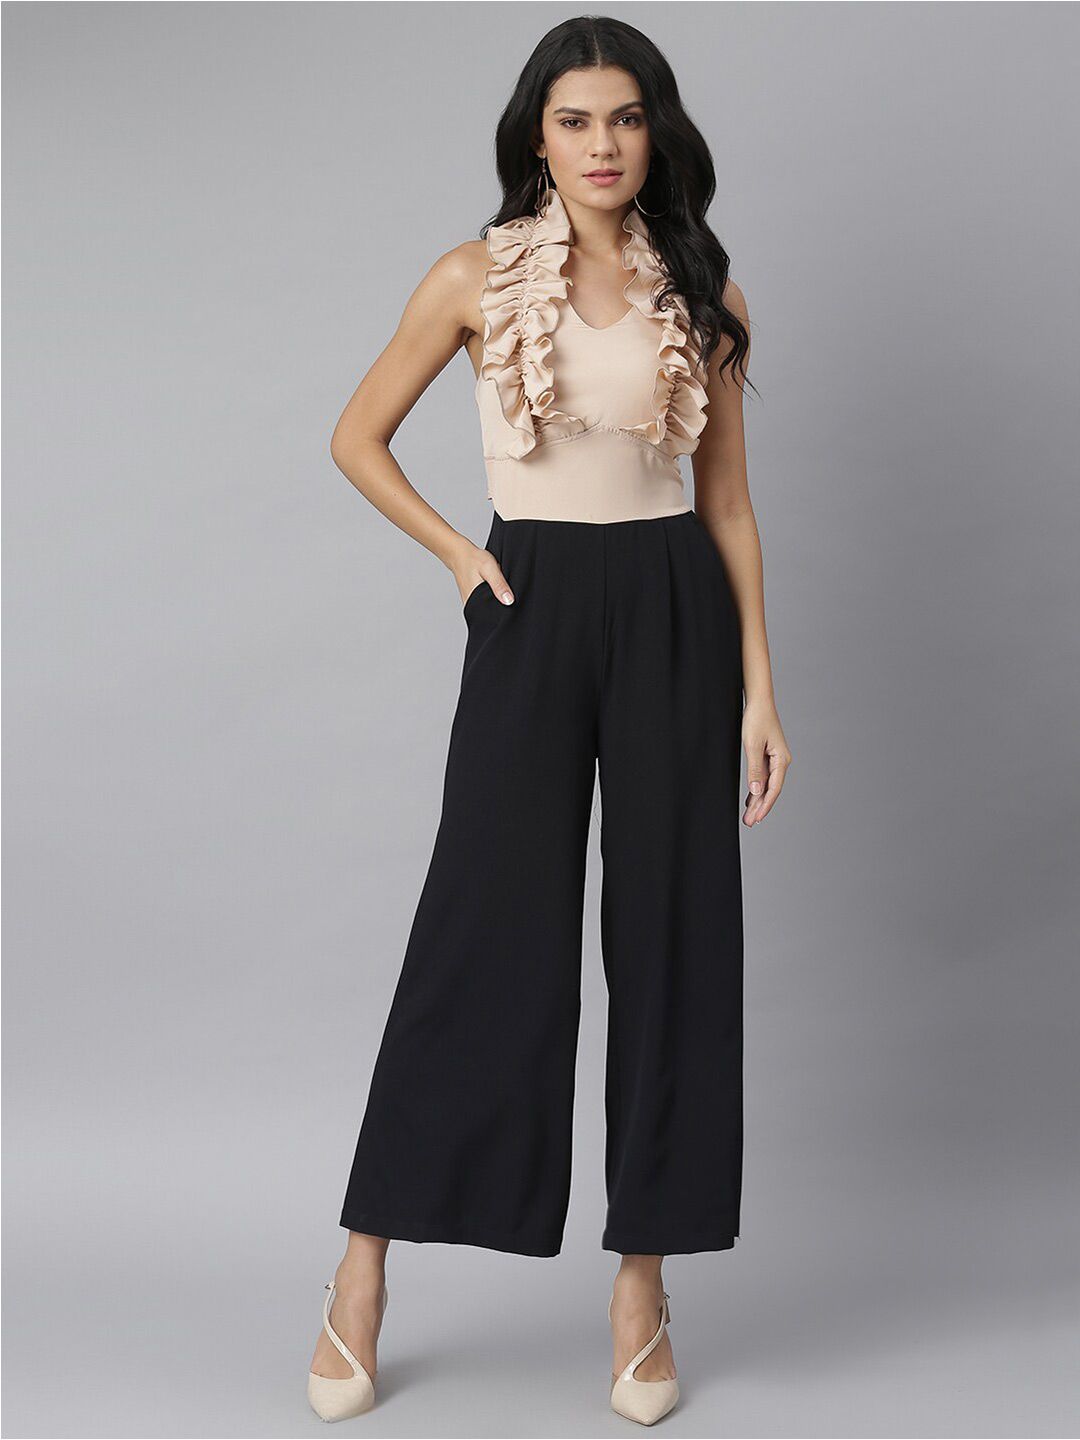 KASSUALLY Beige & Black Basic Jumpsuit with Ruffles Price in India